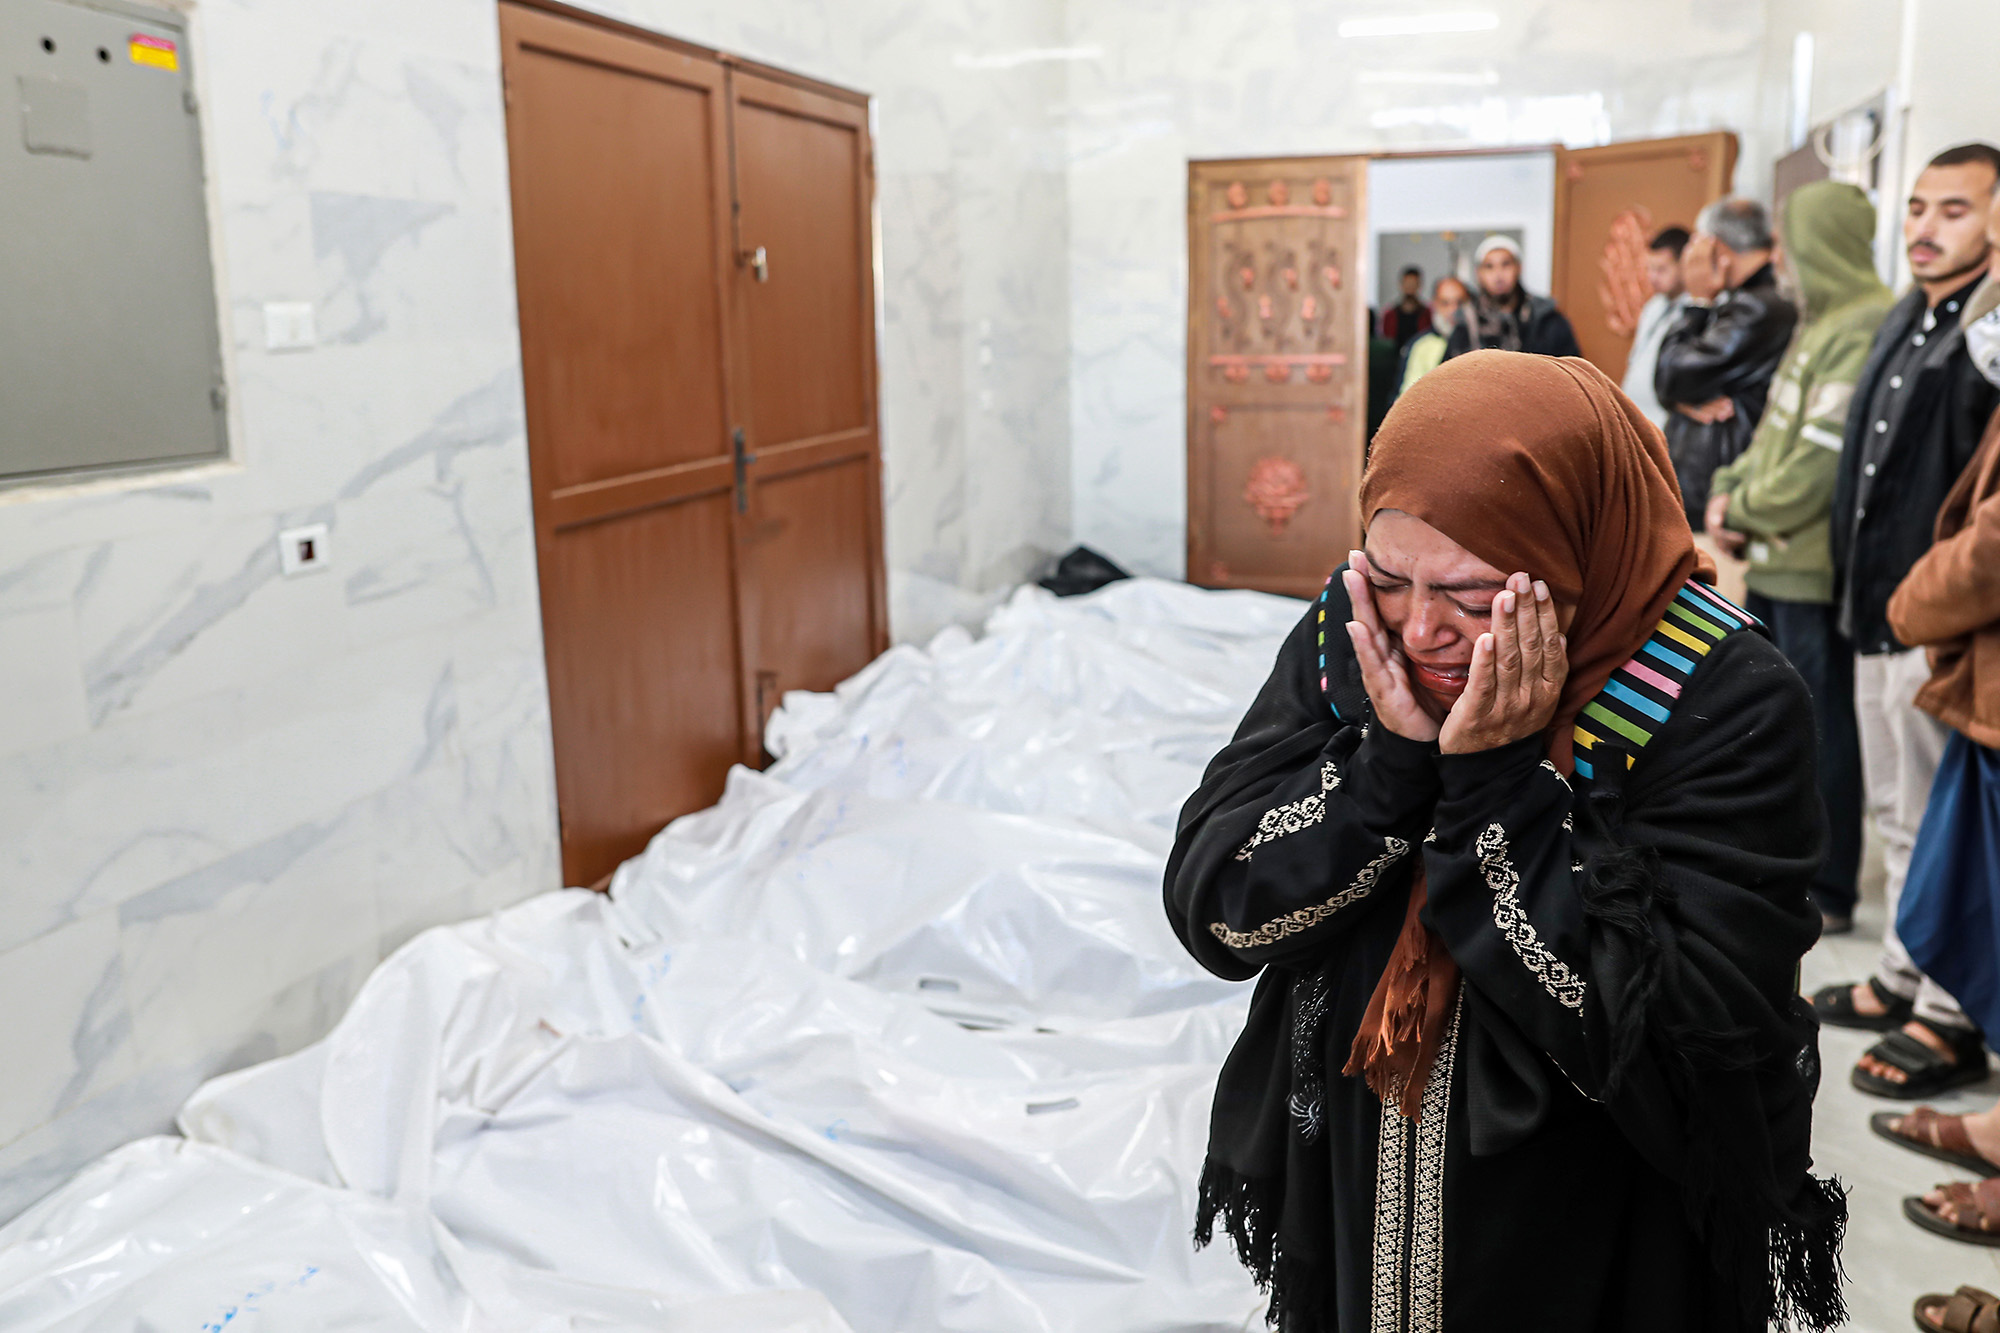 Relatives mourn as bodies are brought to the morgue of European Hospital in Khan Younis, Gaza, on March 5.